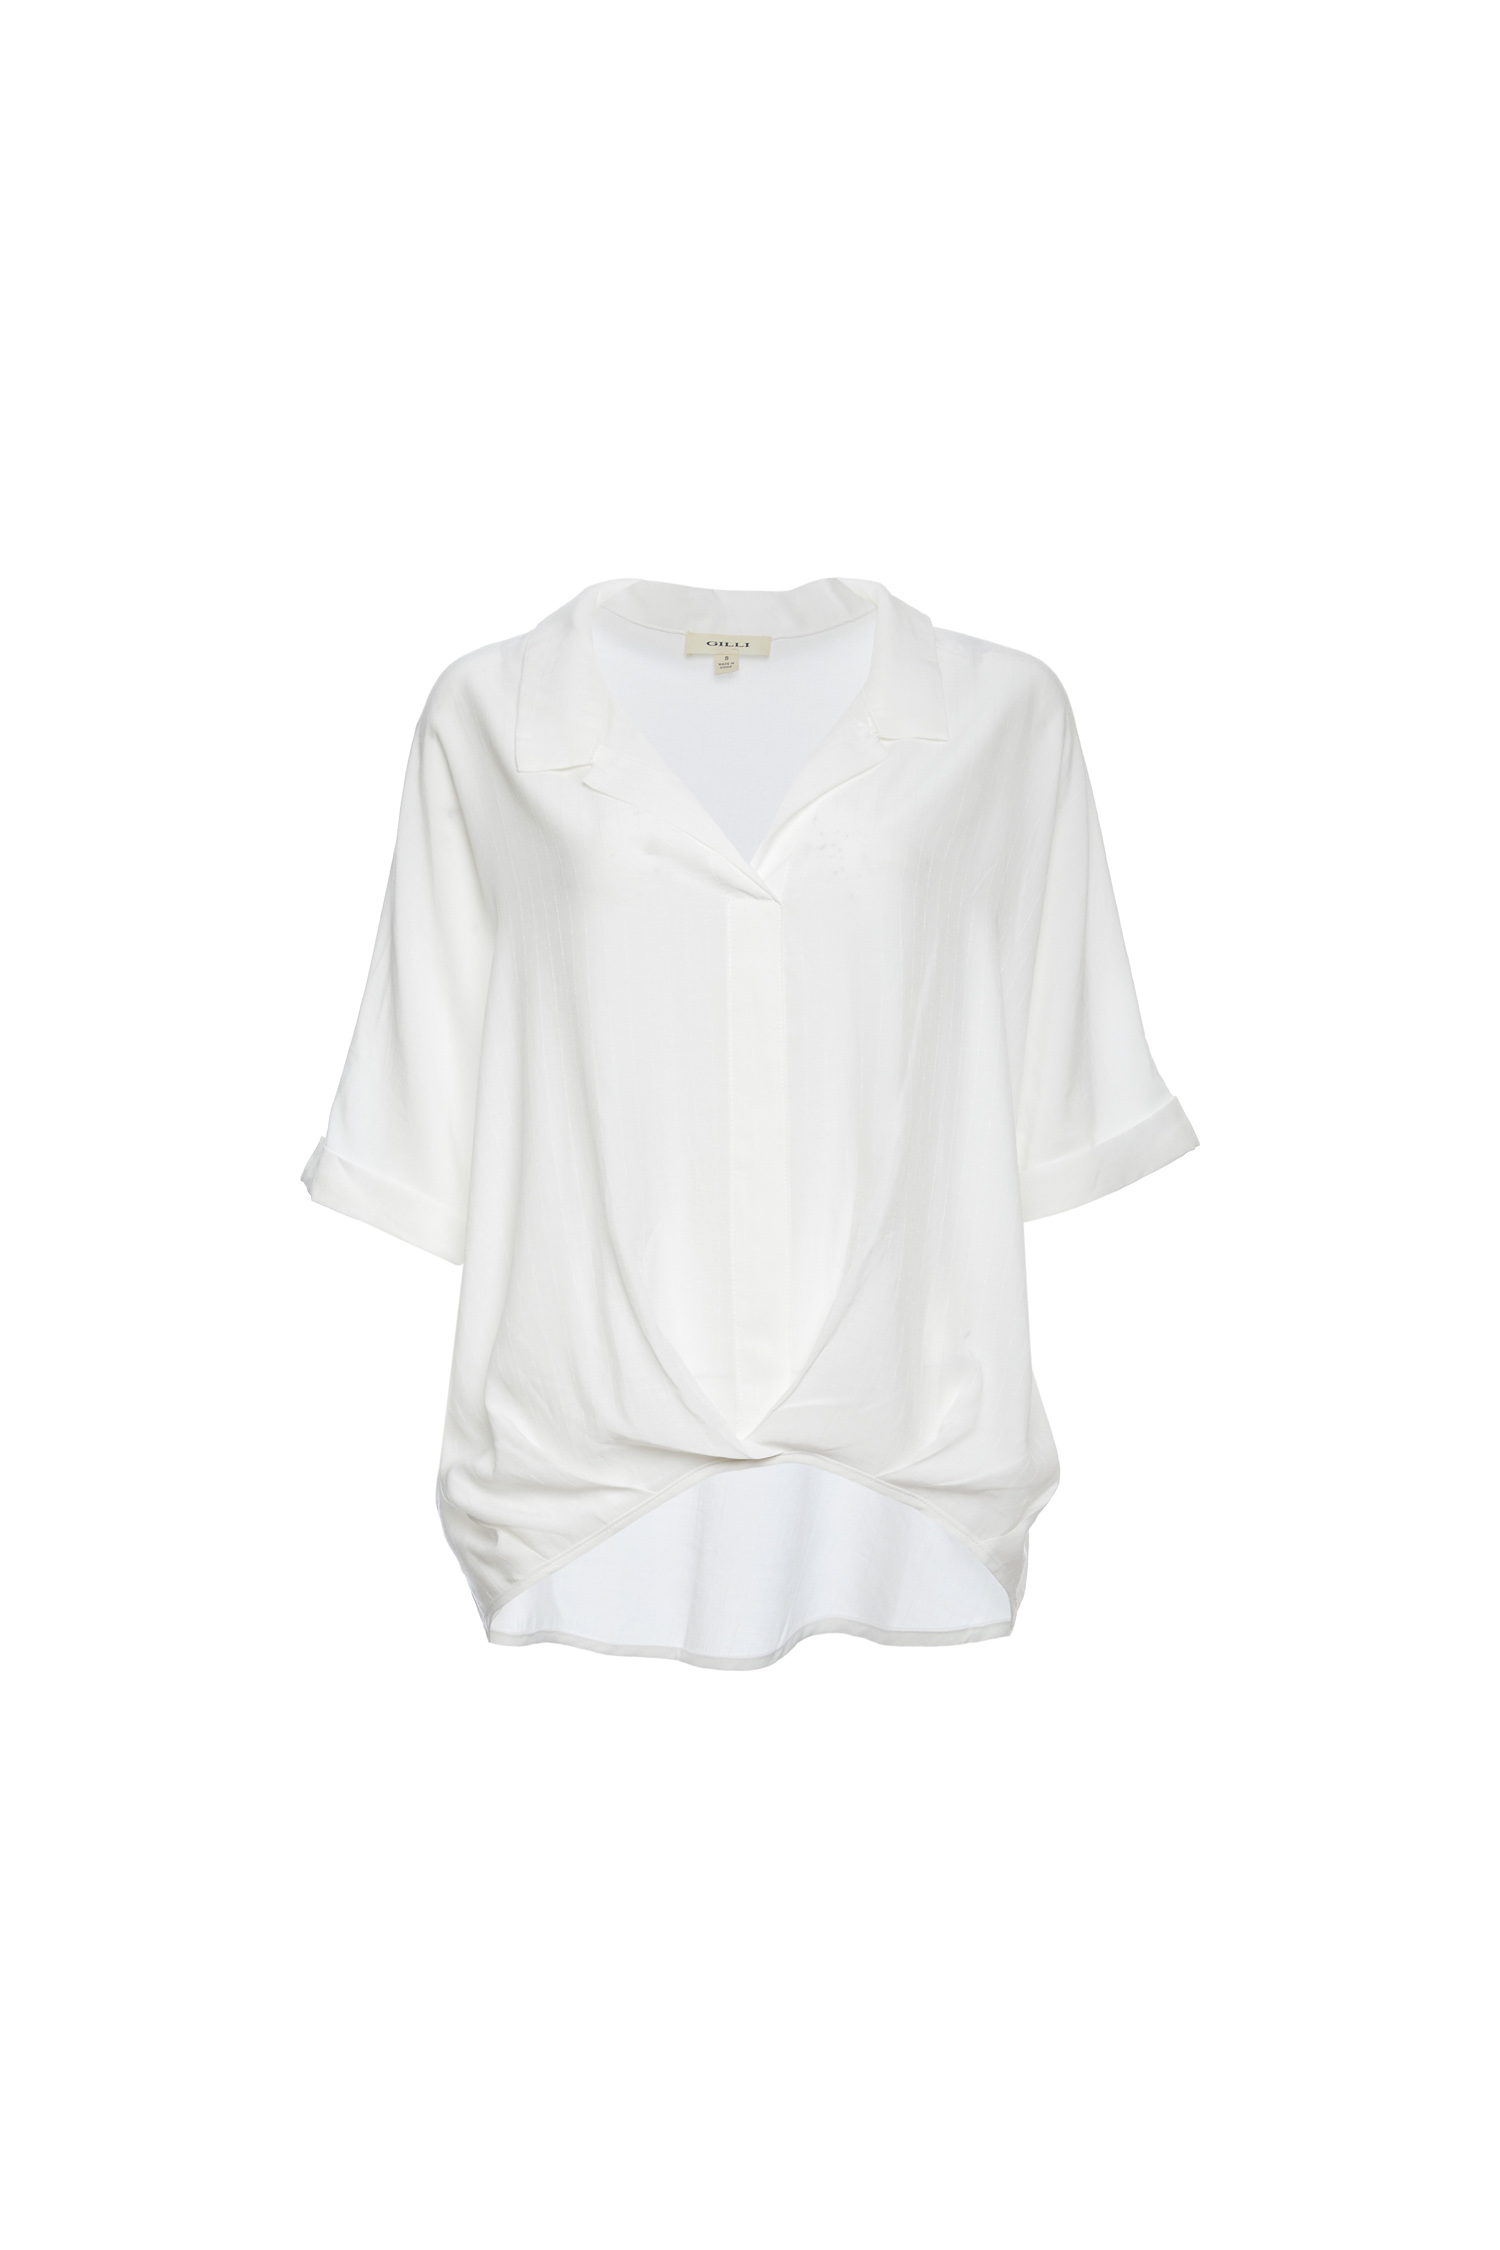 V-Neck Front Pleat Top in White S - L | DAILYLOOK